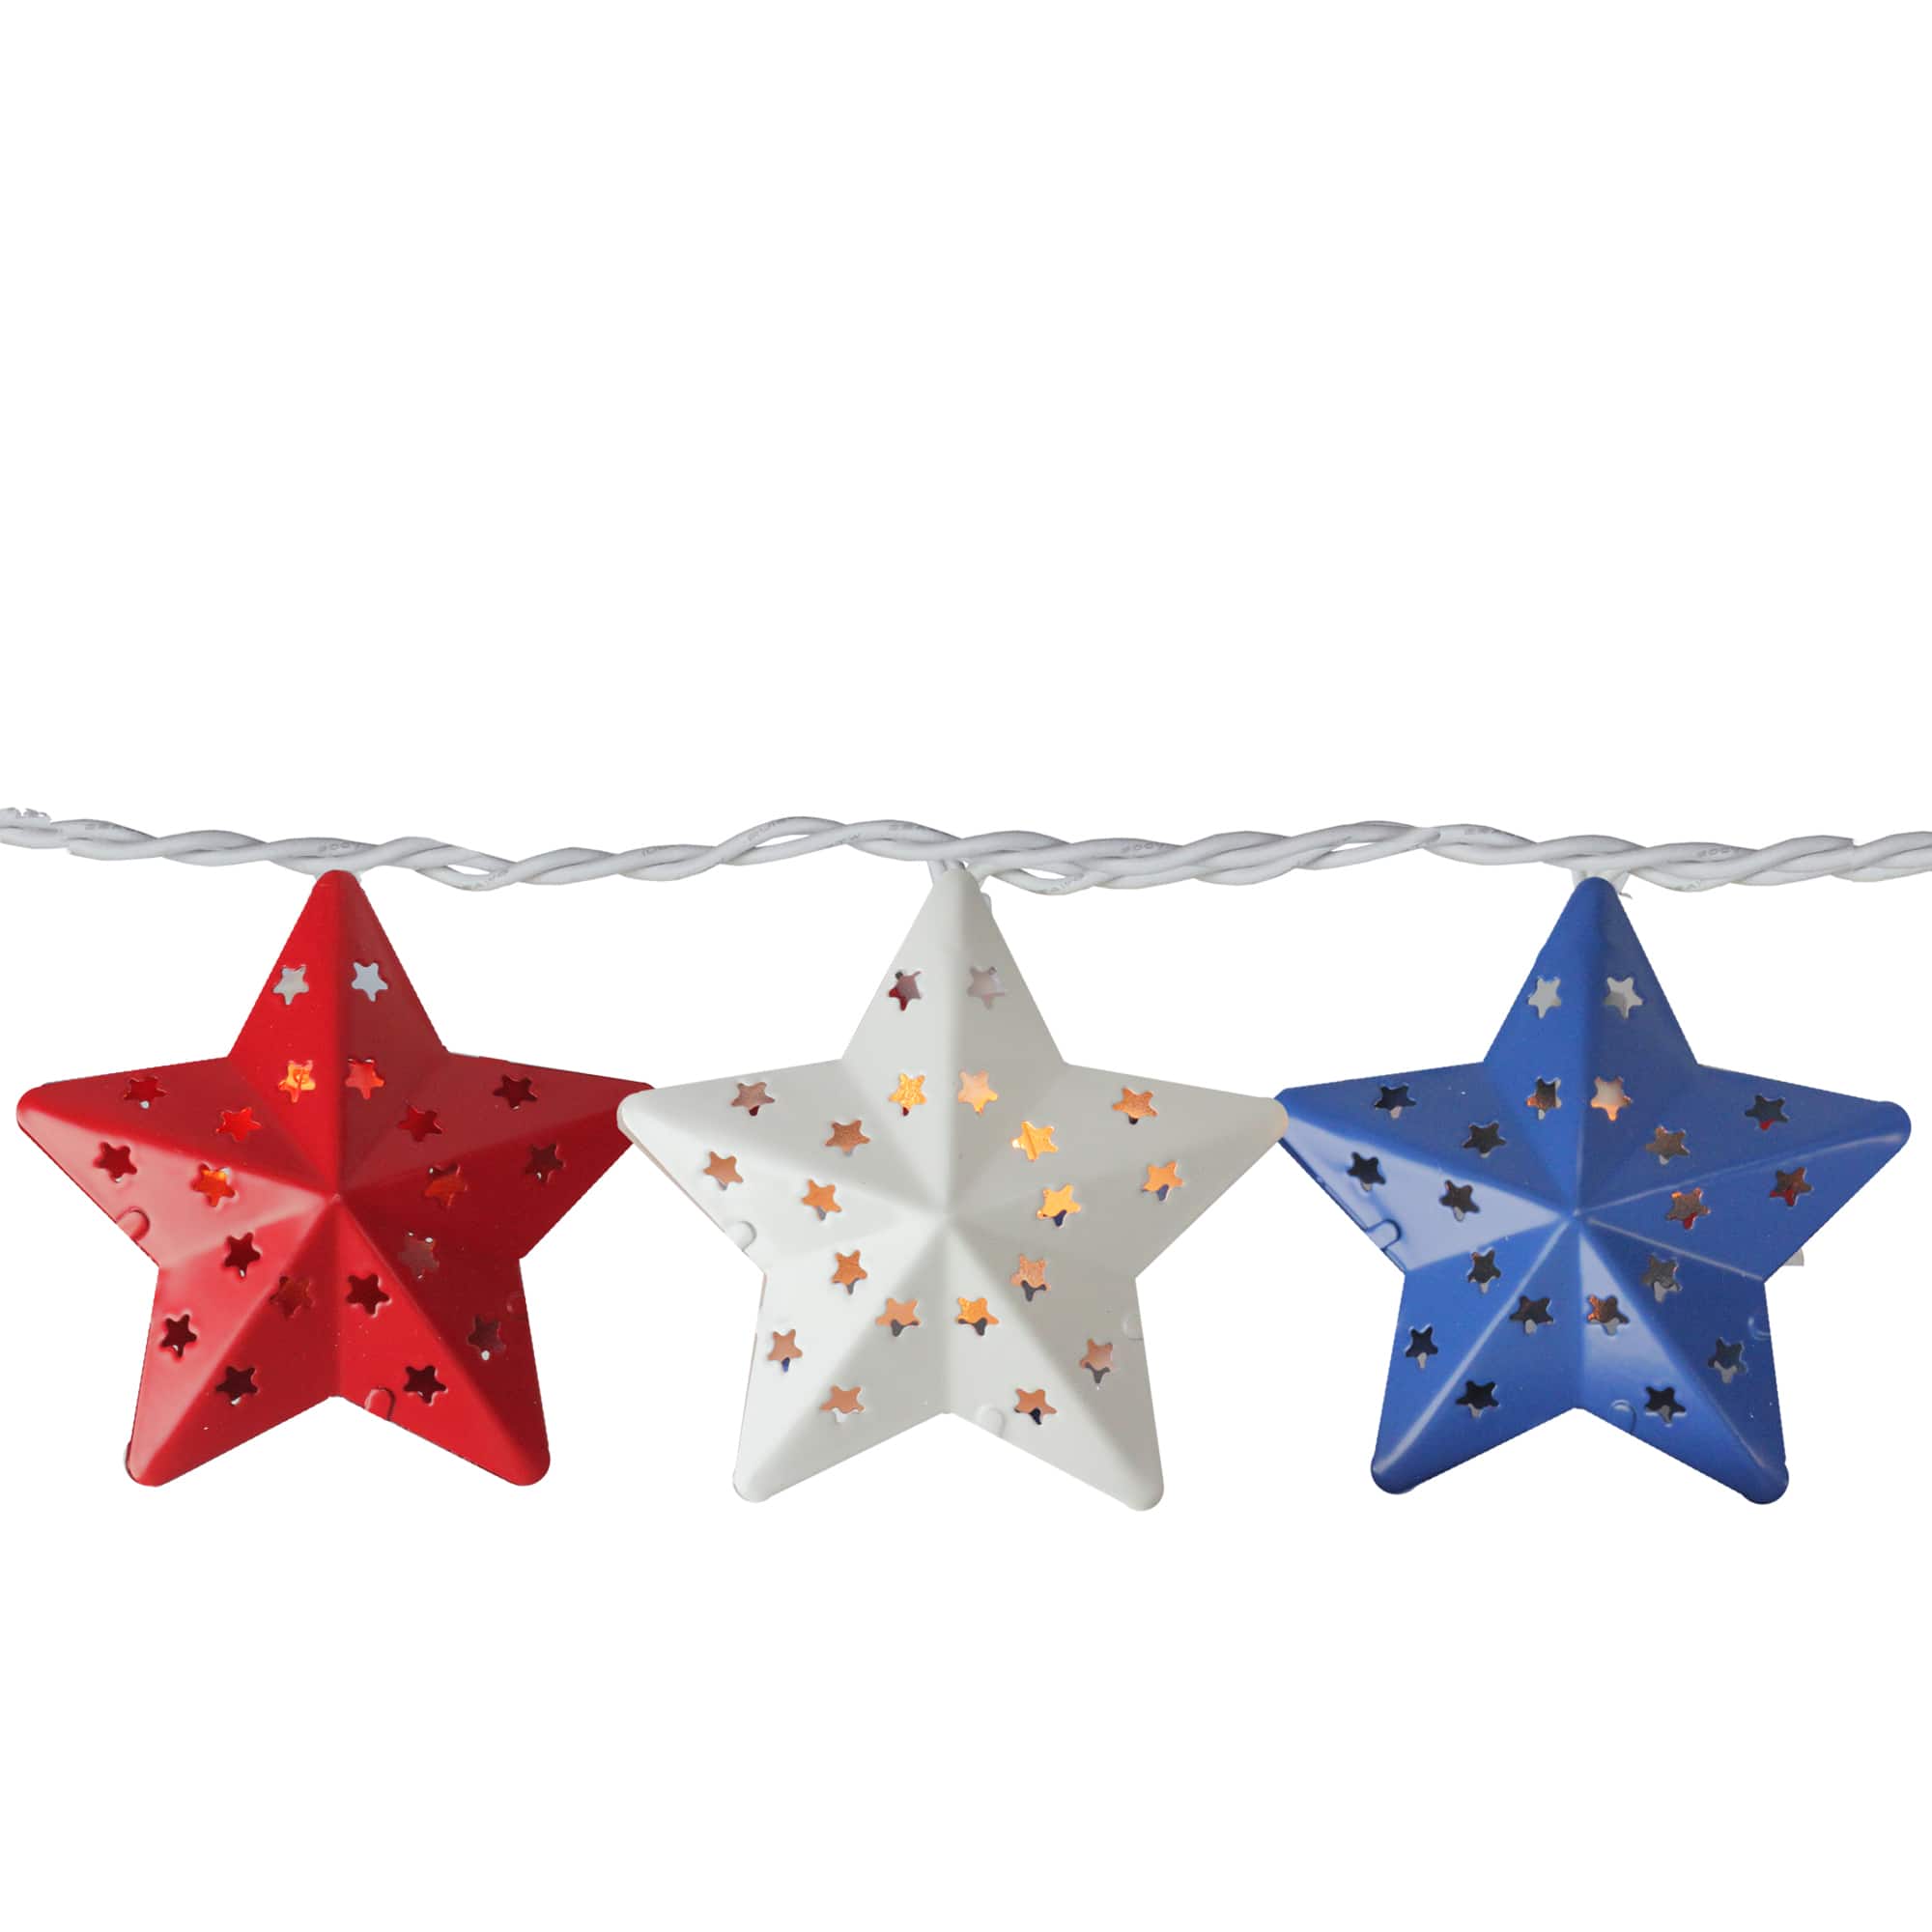 10ct. Red, White and Blue Metal 4th of July Star String Lights